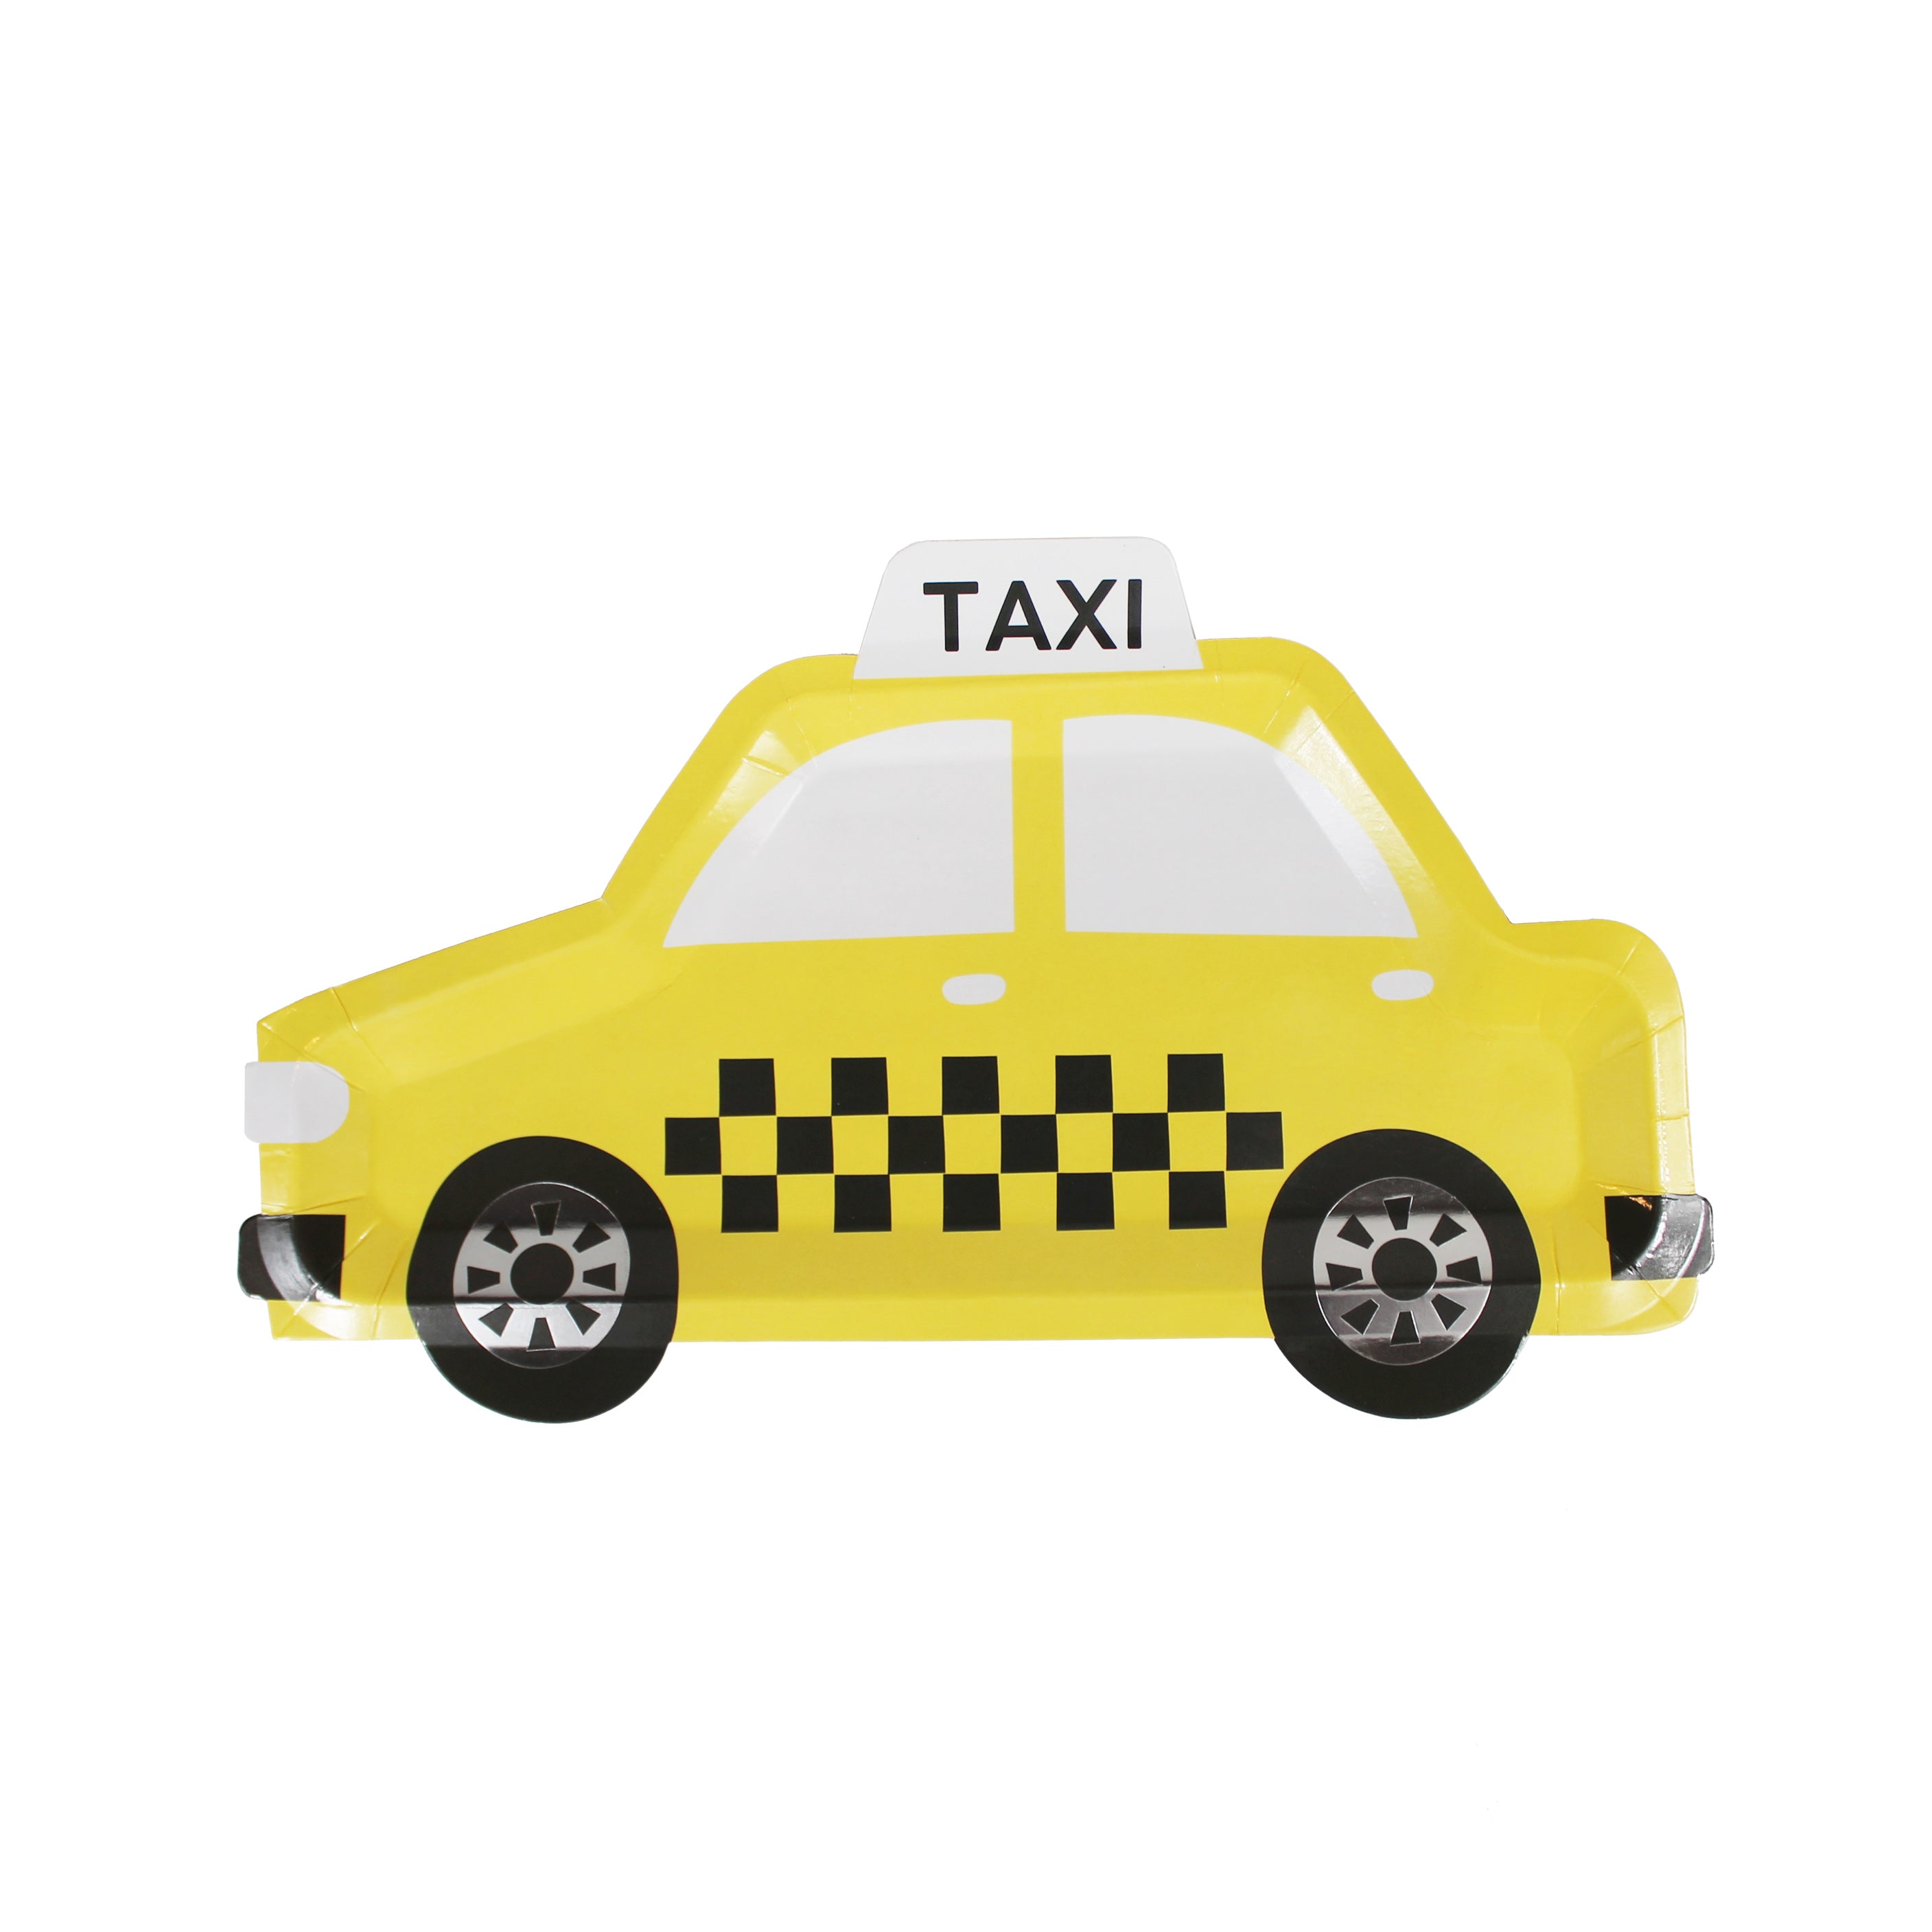 Taxi Plates, 12 Ct